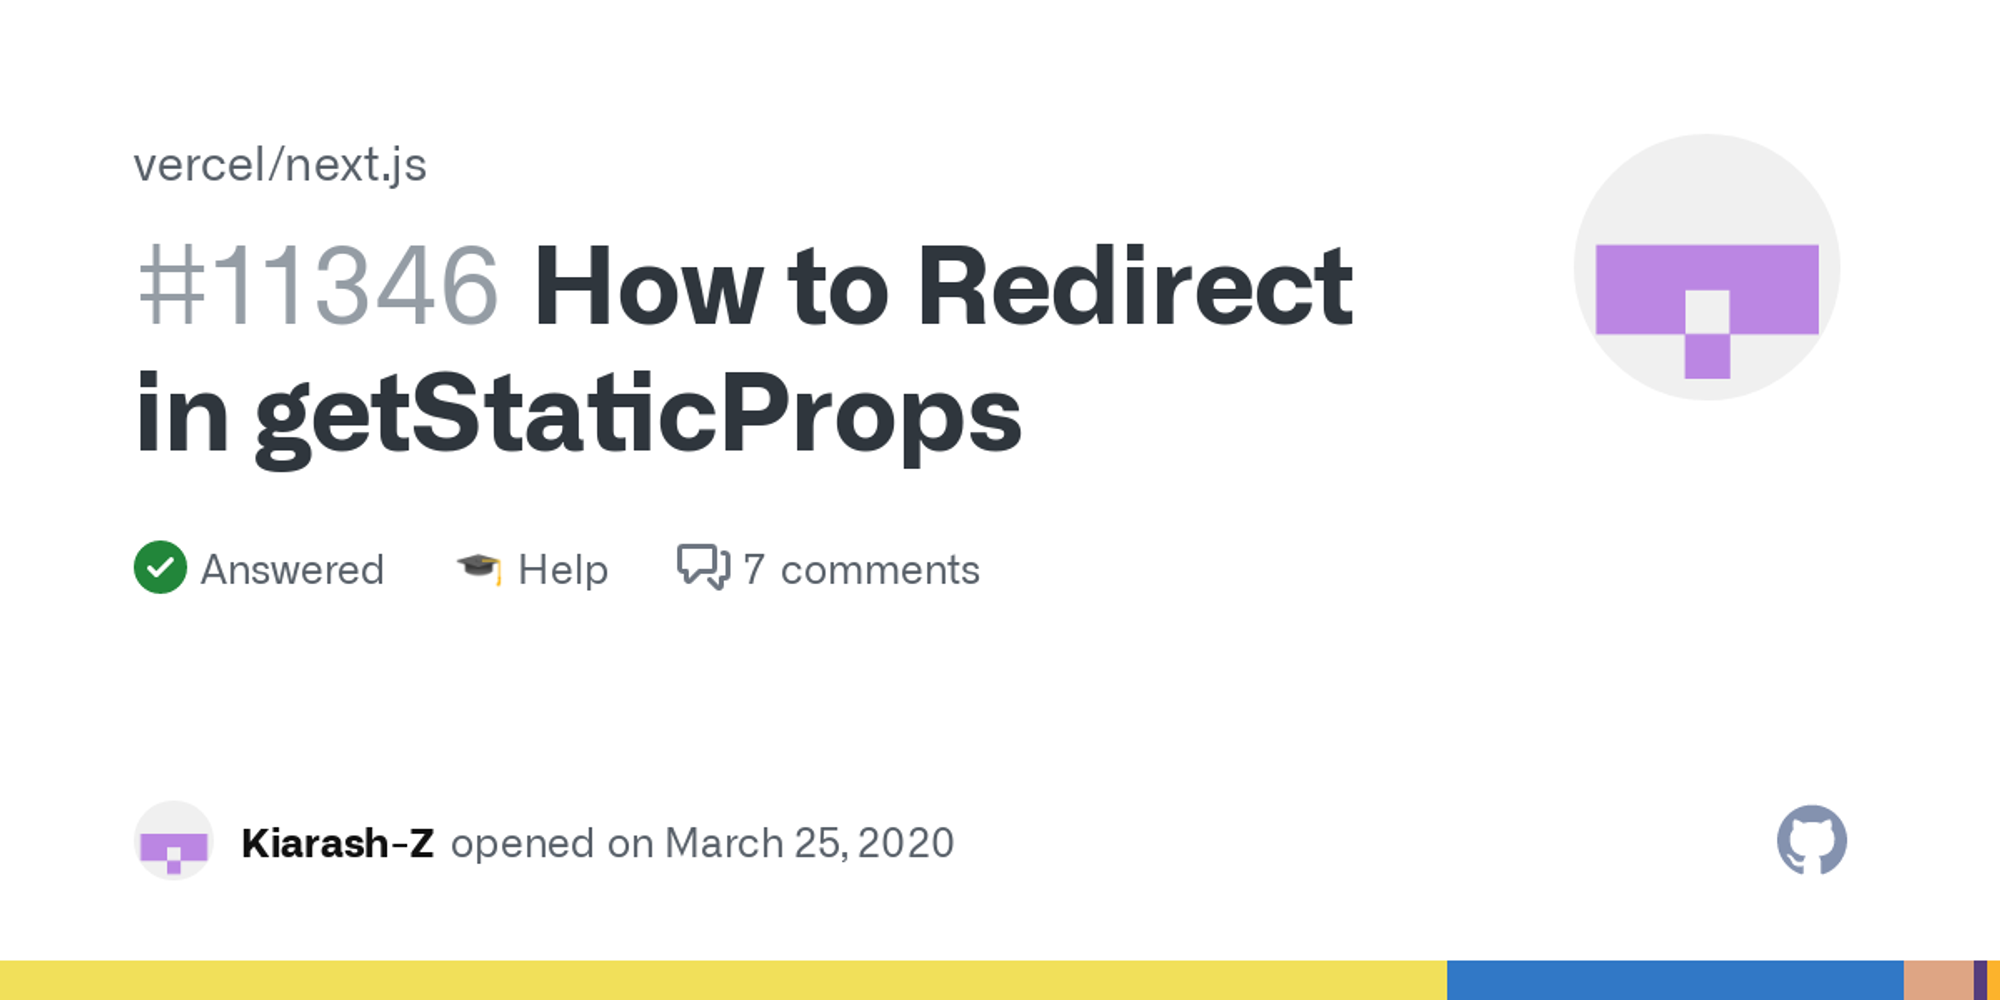 How to Redirect in getStaticProps · Discussion #11346 · vercel/next.js